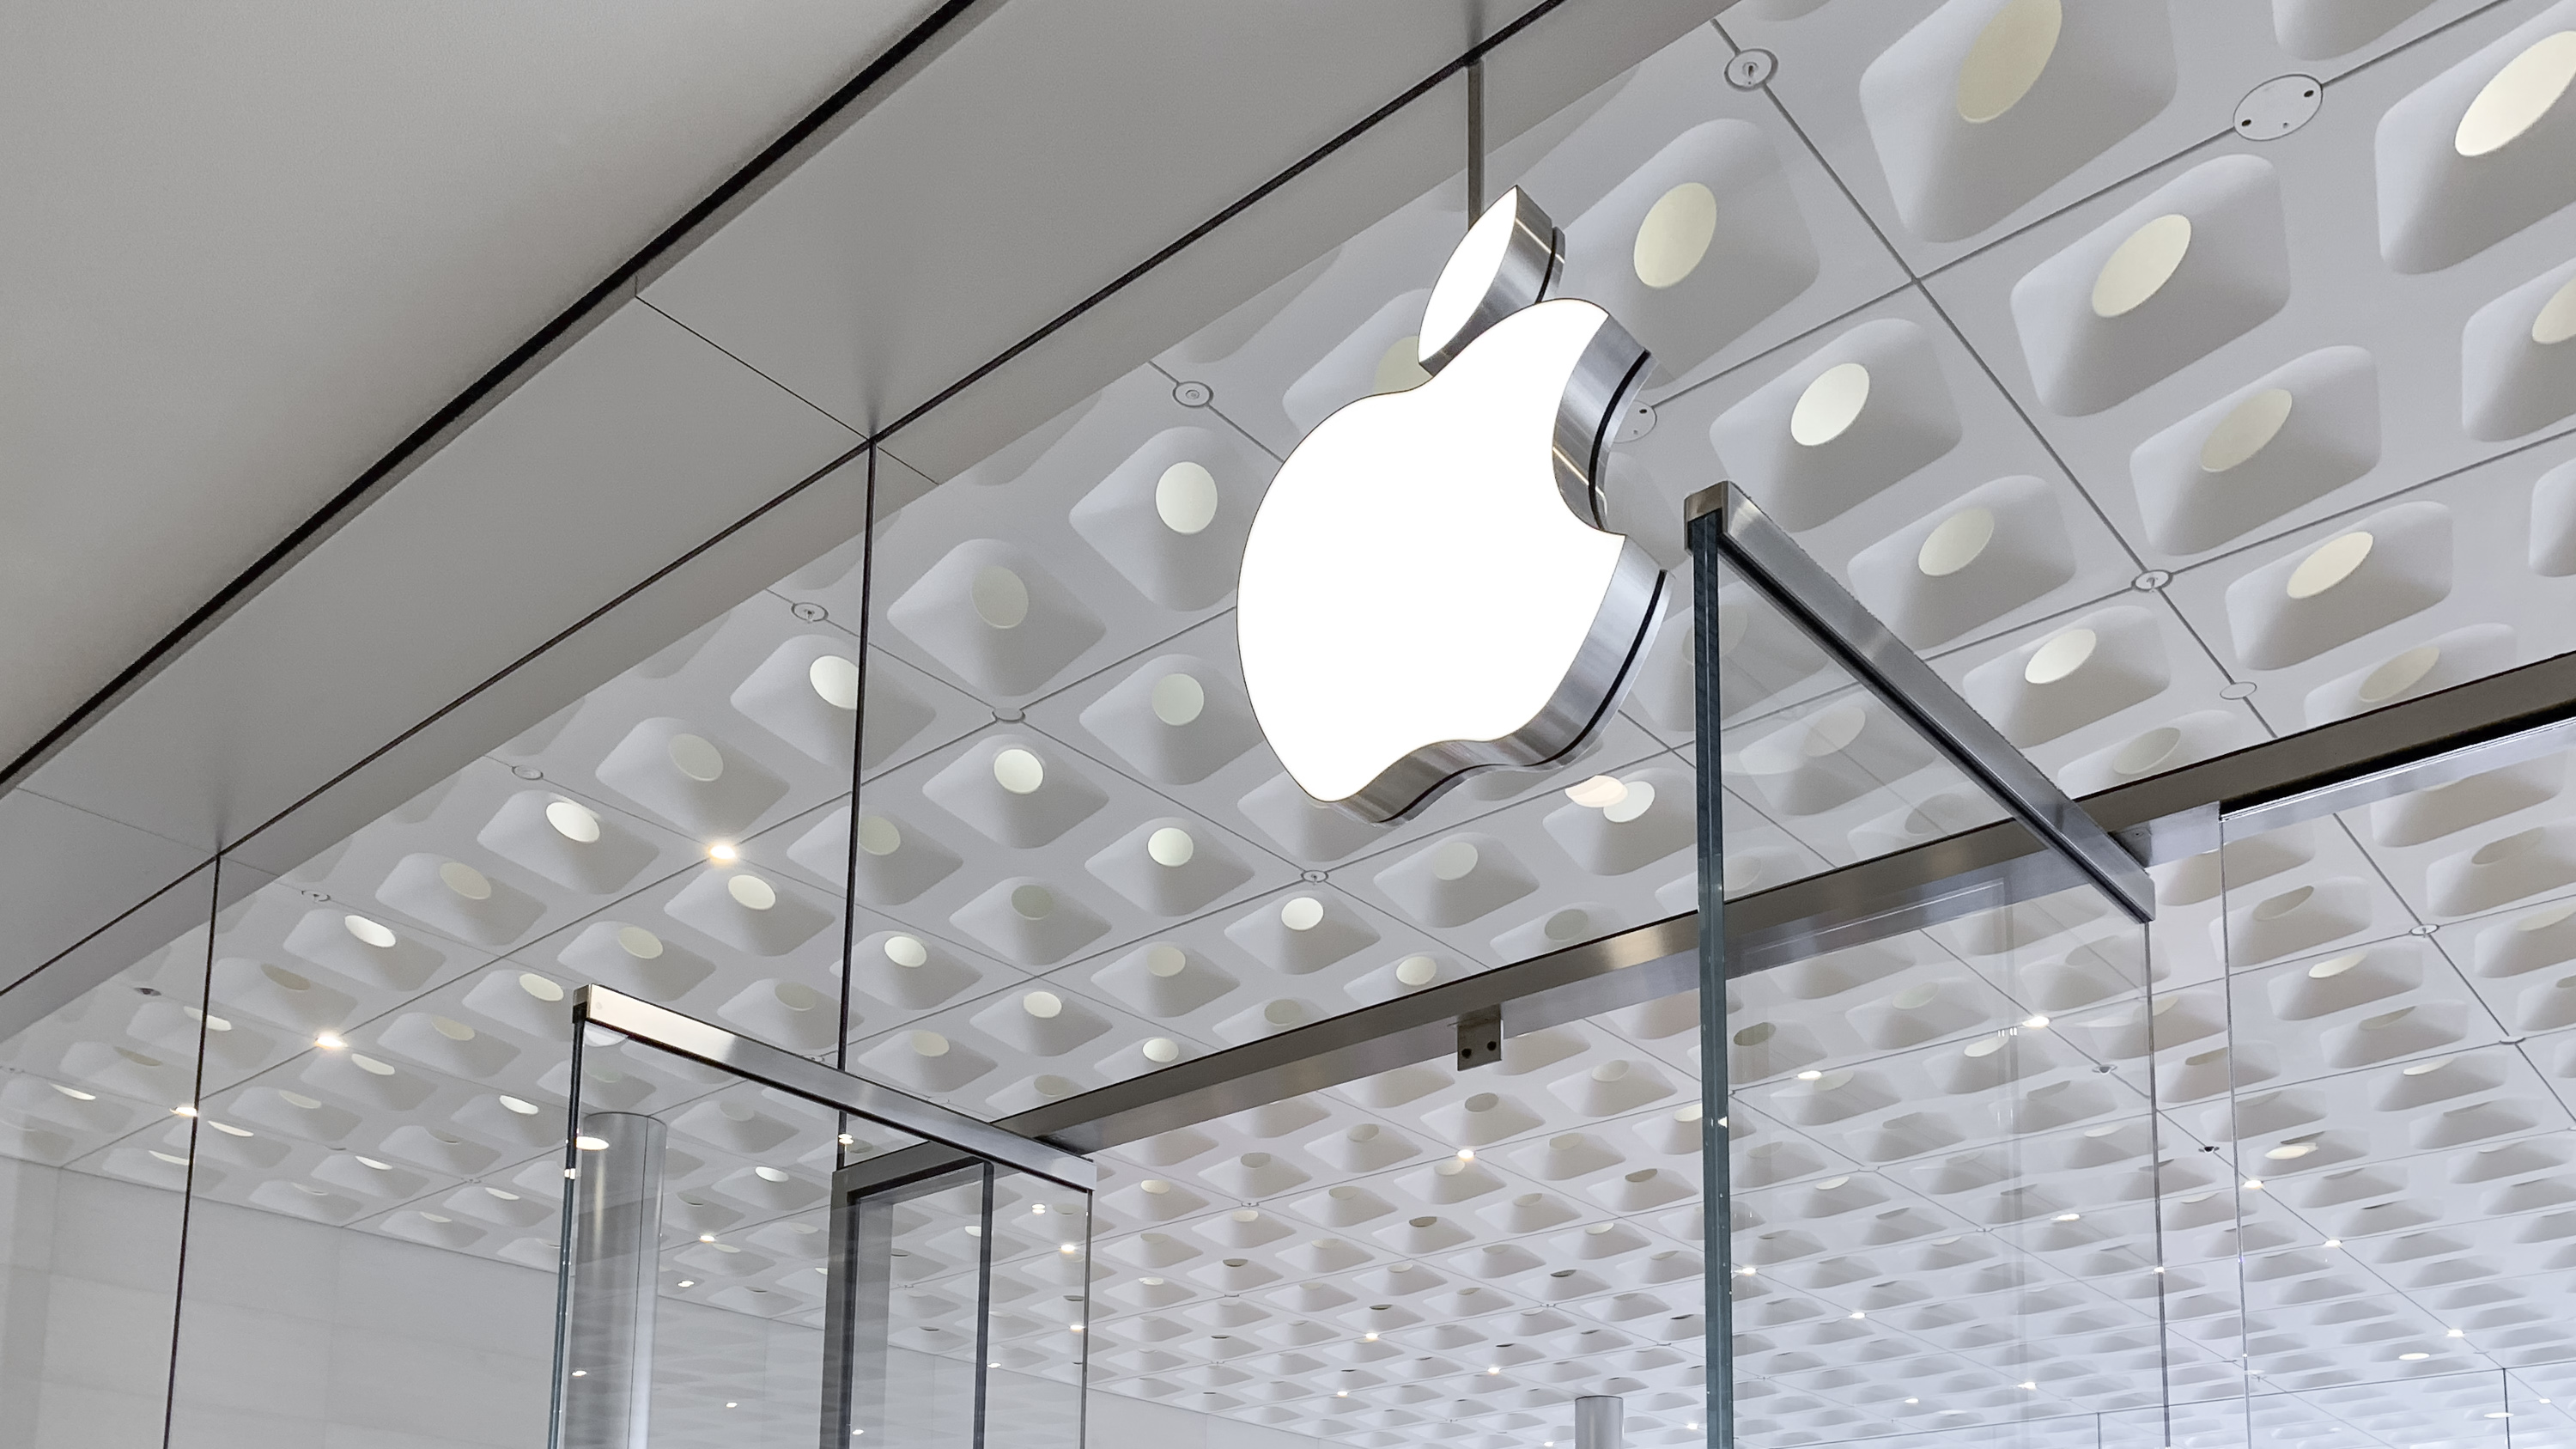 Every US Apple Store is open for the first time since March 2020 - 9to5Mac